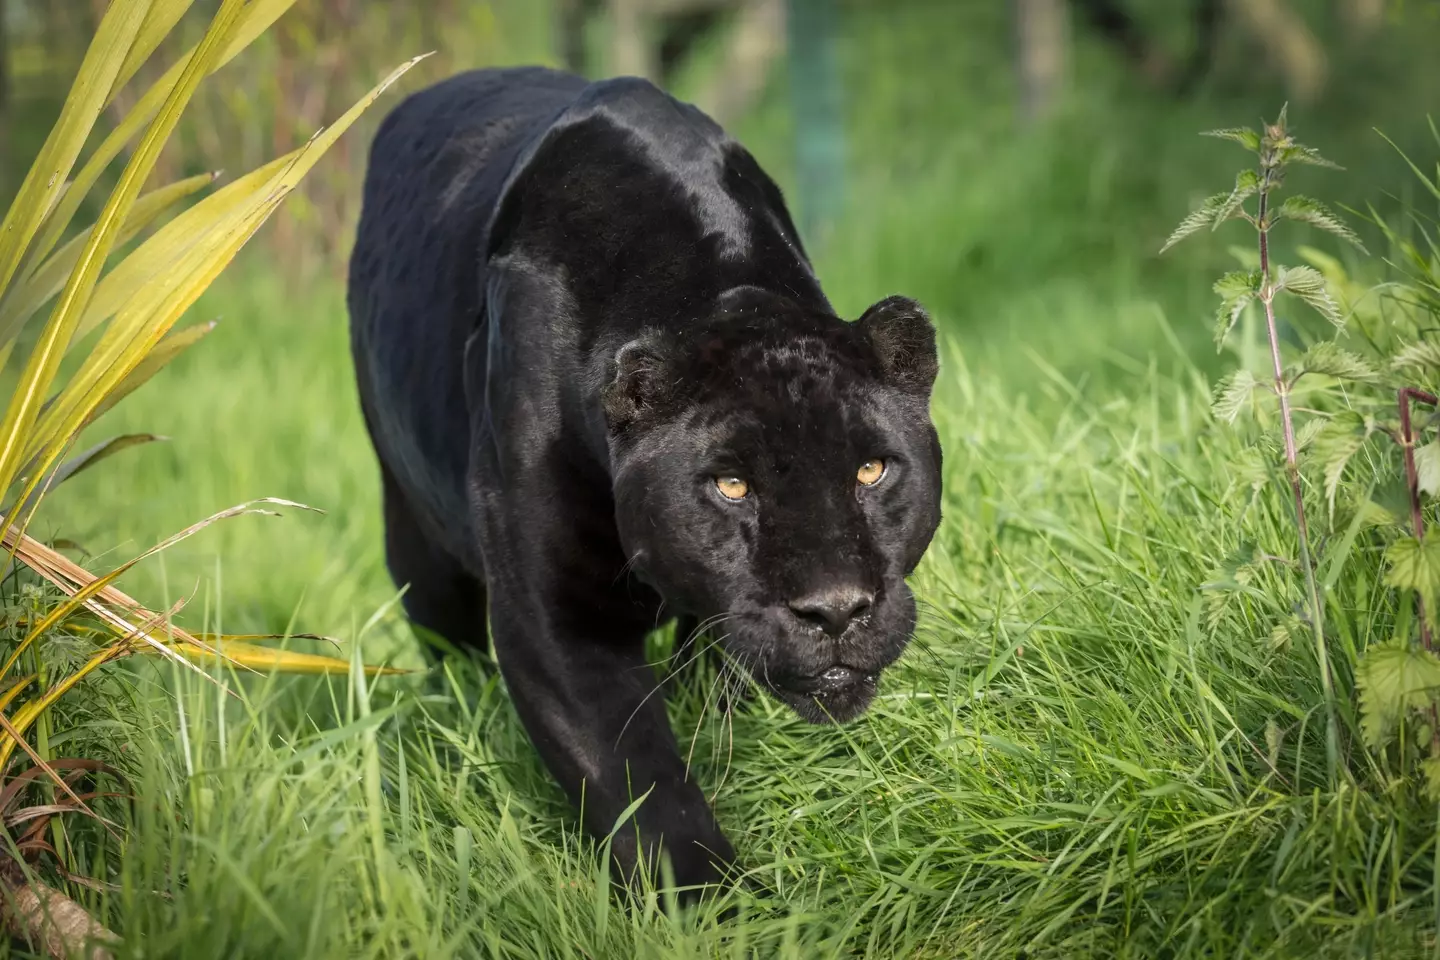 The two men took their legally-owned firearms because of stories of a black panther lurking nearby.